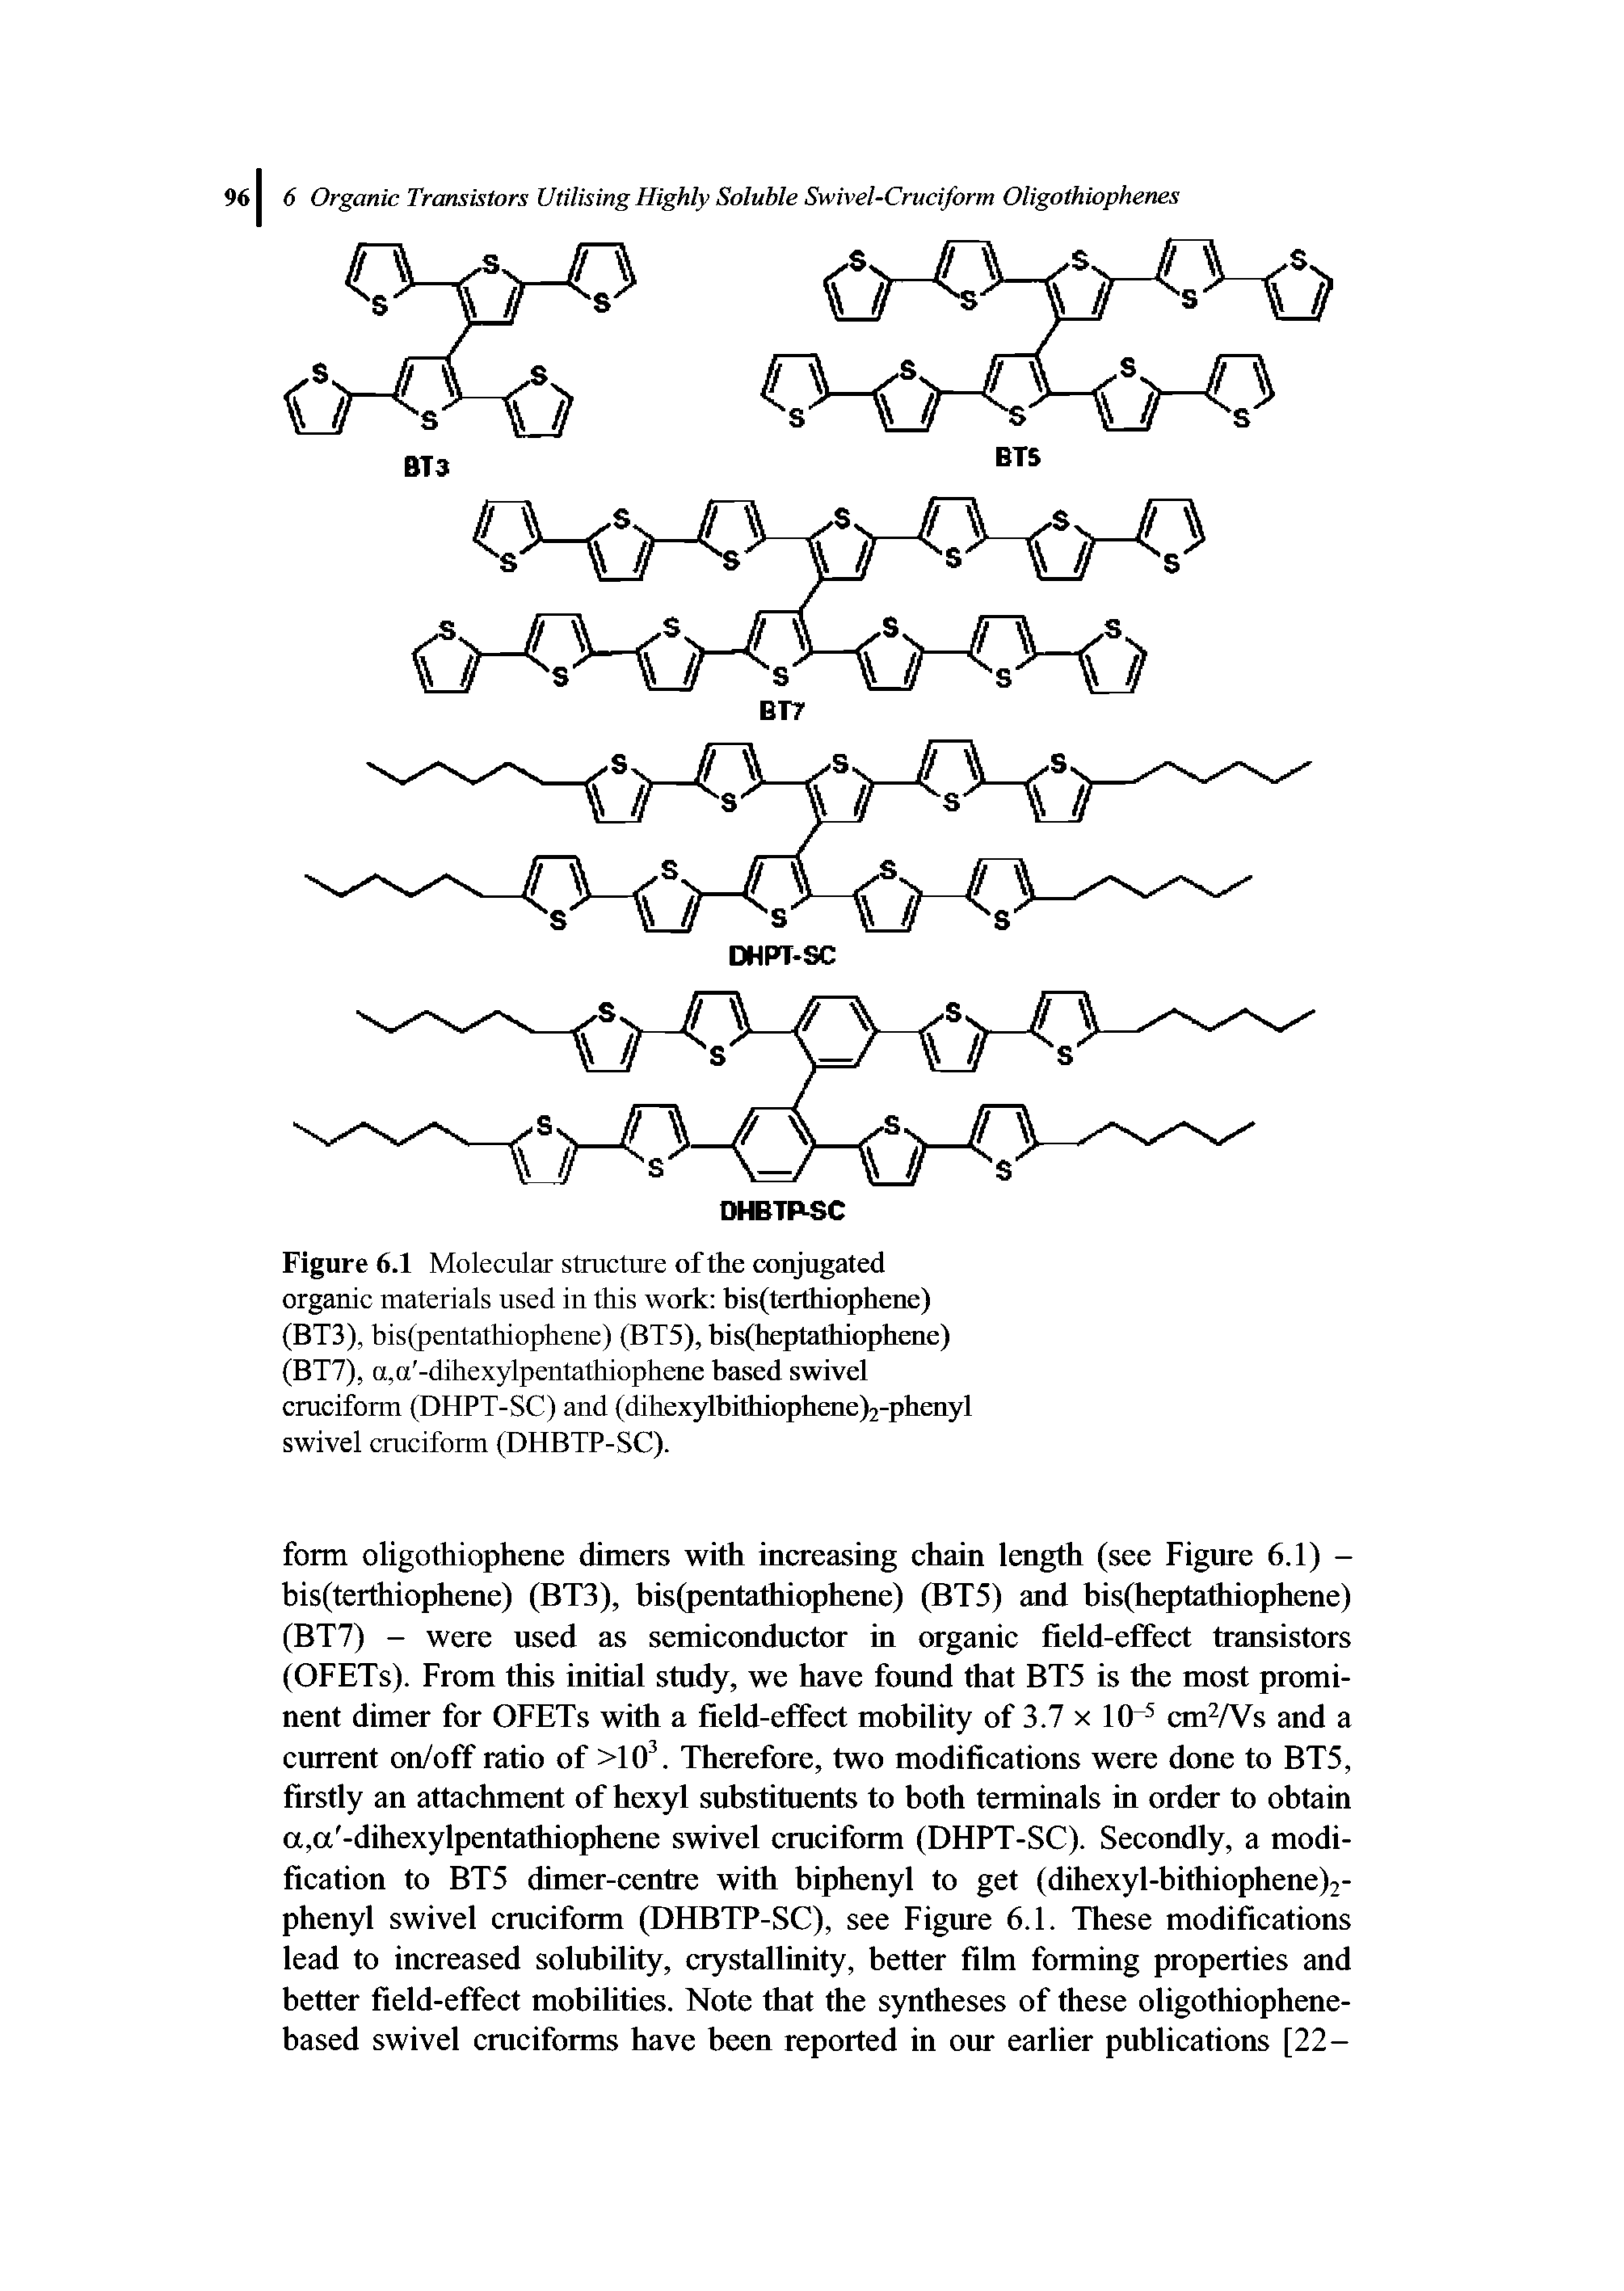 Figure 6.1 Molecular structure of the conjugated organic materials used in this work his(terthiophene) (BT3), bis(pentathiophene) (BT5), his(heptathiophene) (BT7), a,a -dihexylpentathiophene based swivel cruciform (DHPT-SC) and (dihexylbithiophene)2-phenyl swivel cruciform (DHBTP-SC).